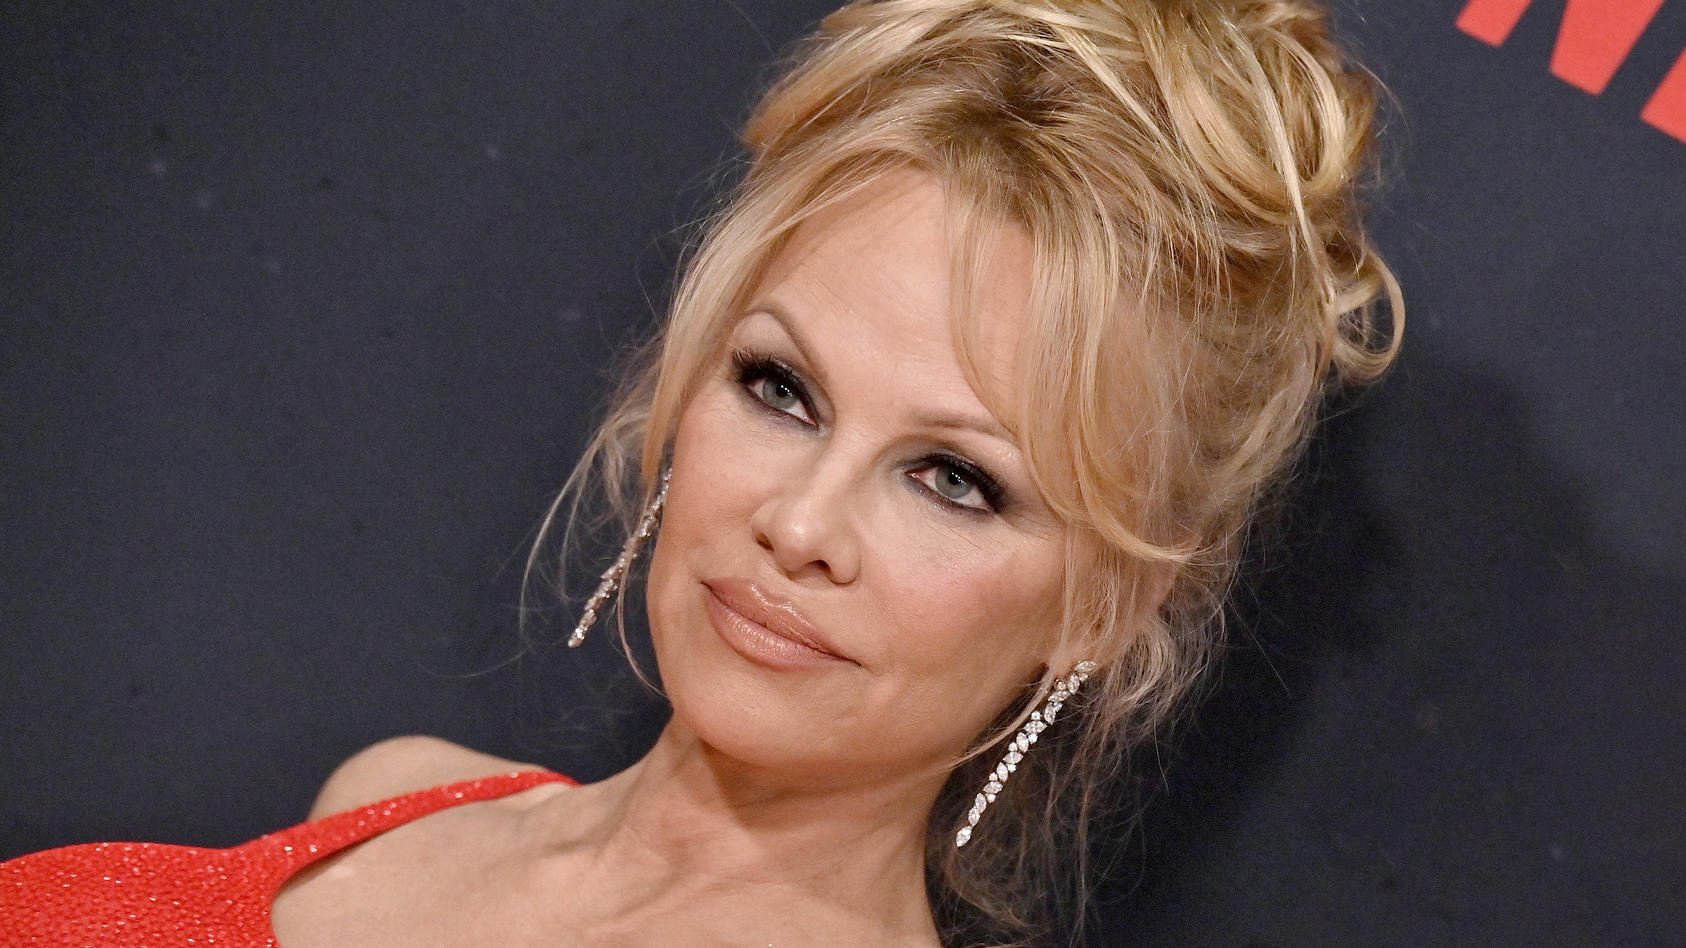 Los Angeles premiere of Netflix s Pamela, a Love Story at TUDUM Theater Featuring: Pamela Anderson Where: Los Angeles, California, United States When: 30 Jan 2023 Credit: BauerGriffin/INSTARimages PUBLICATIONxNOTxINxUKxFRA Copyright: xAXELLExWOUSSENx